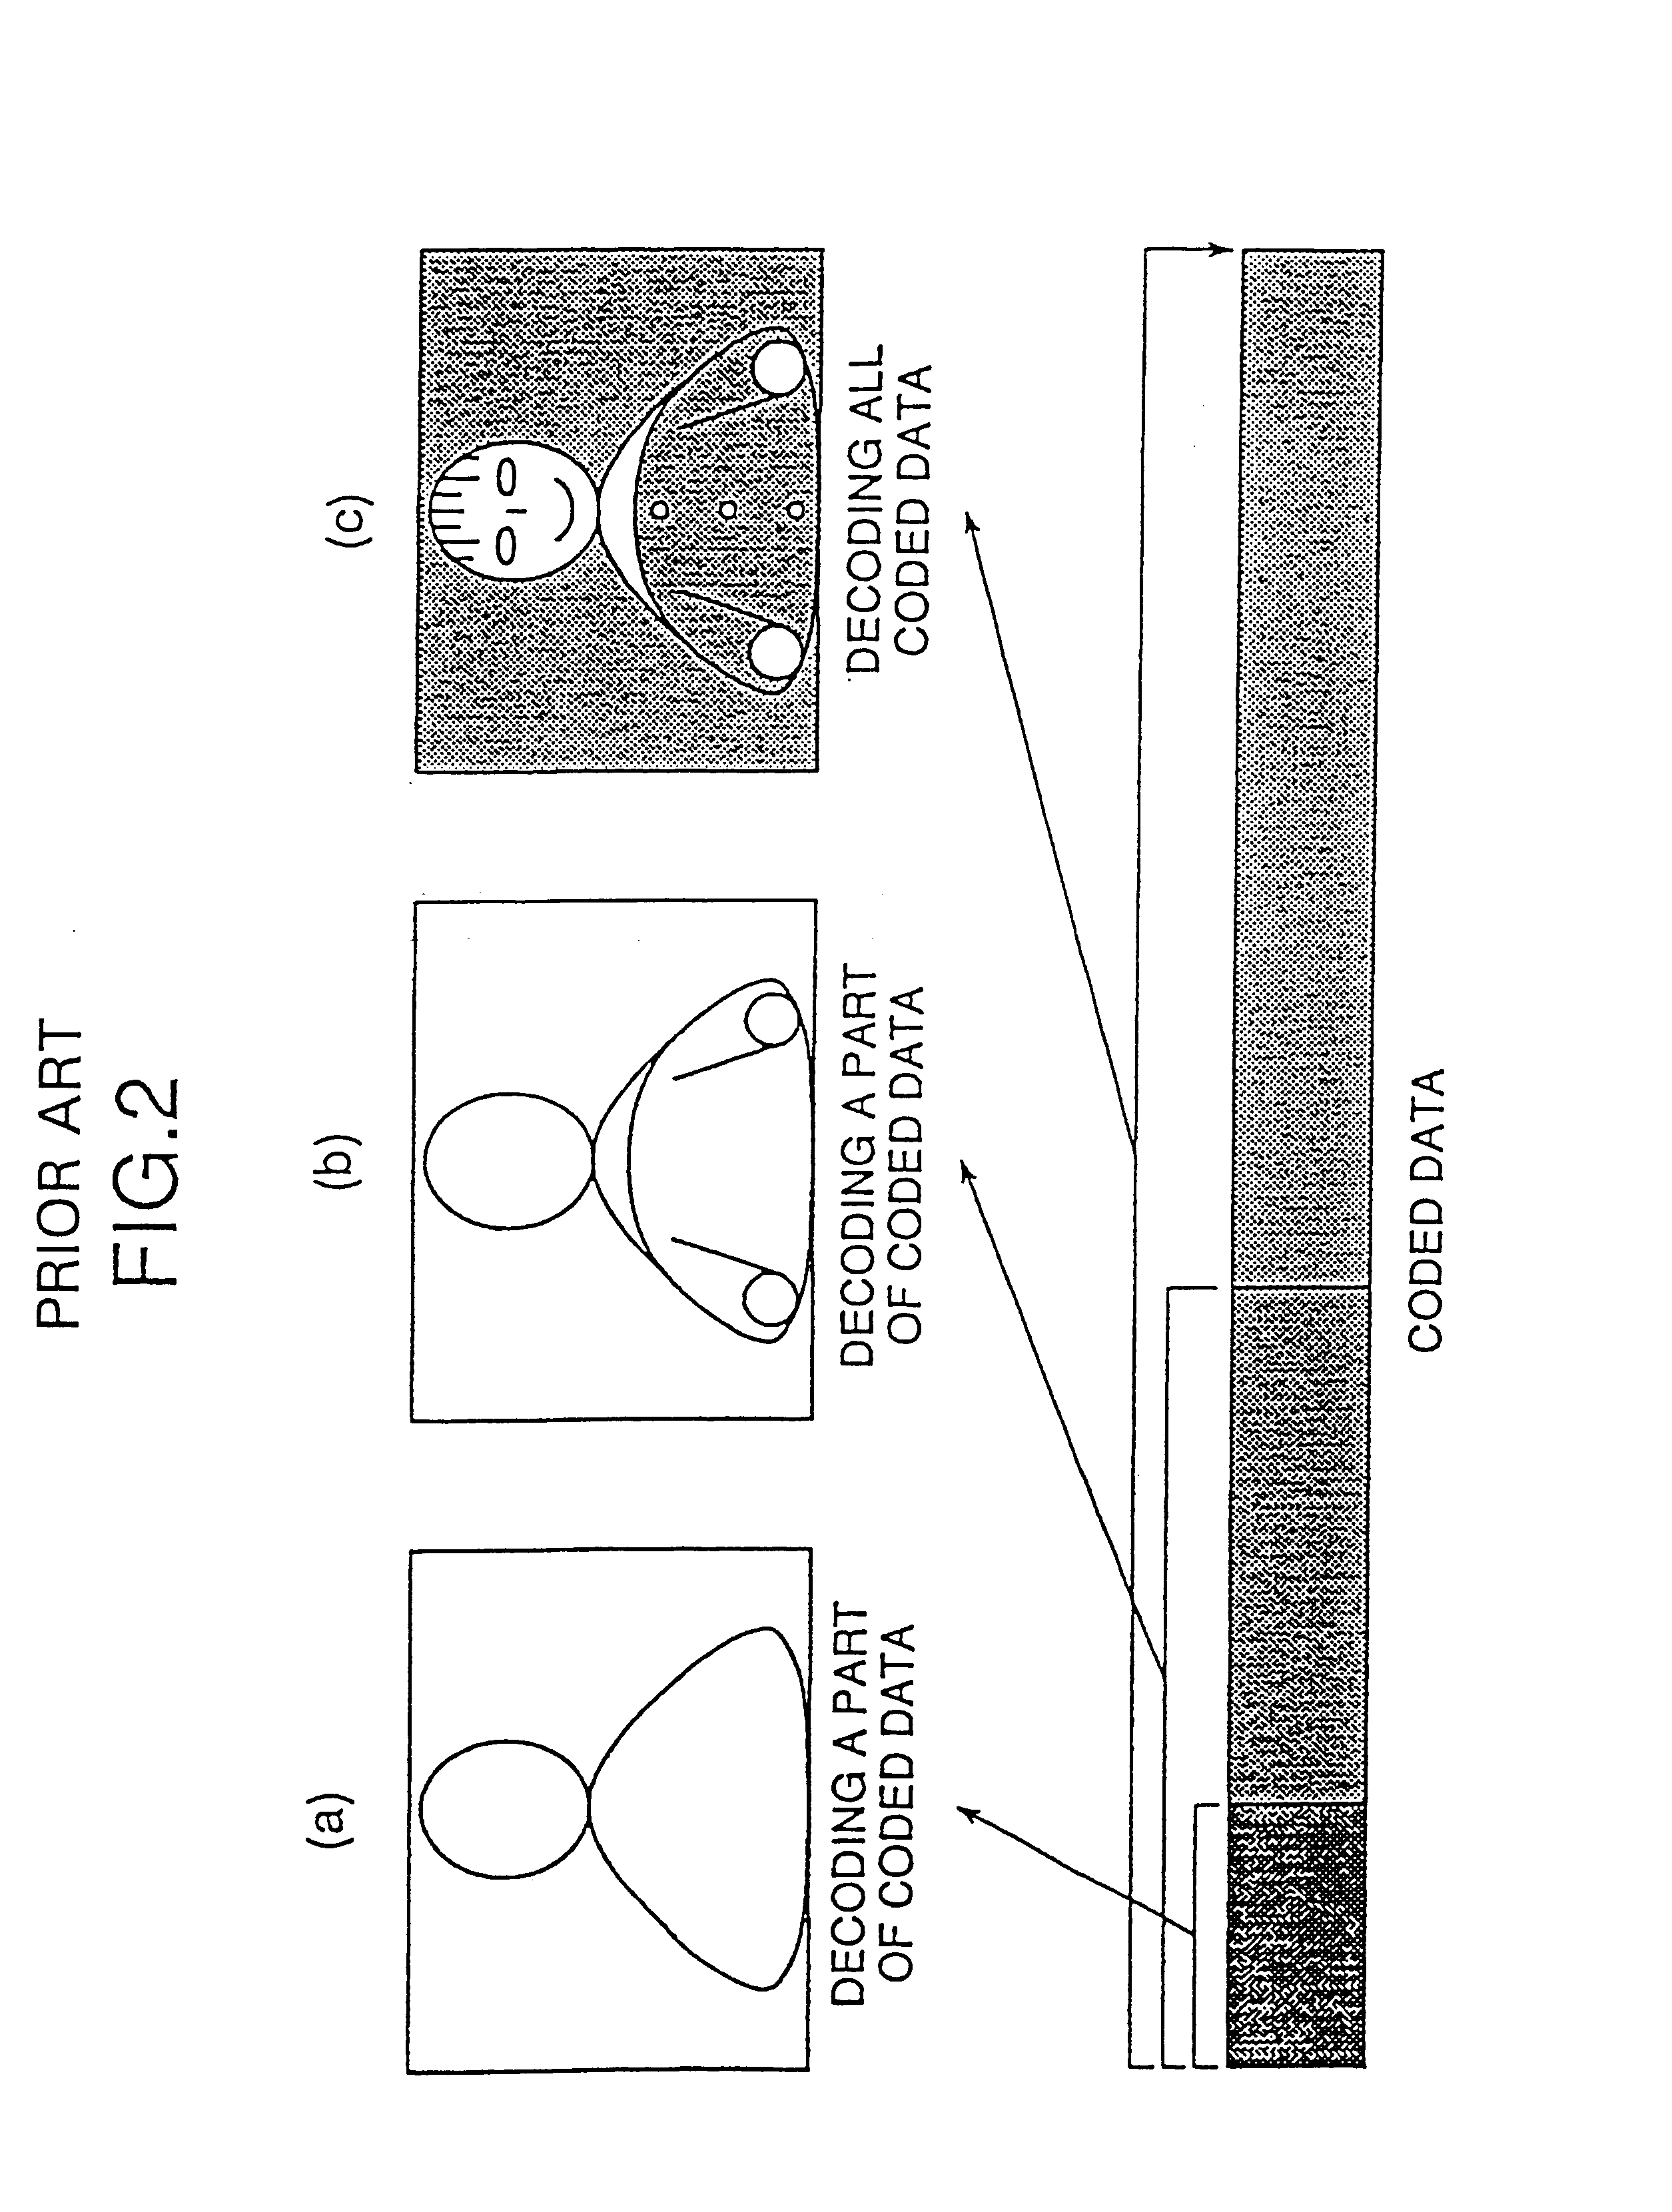 Image decoding device for decoding a hierarchically coded image